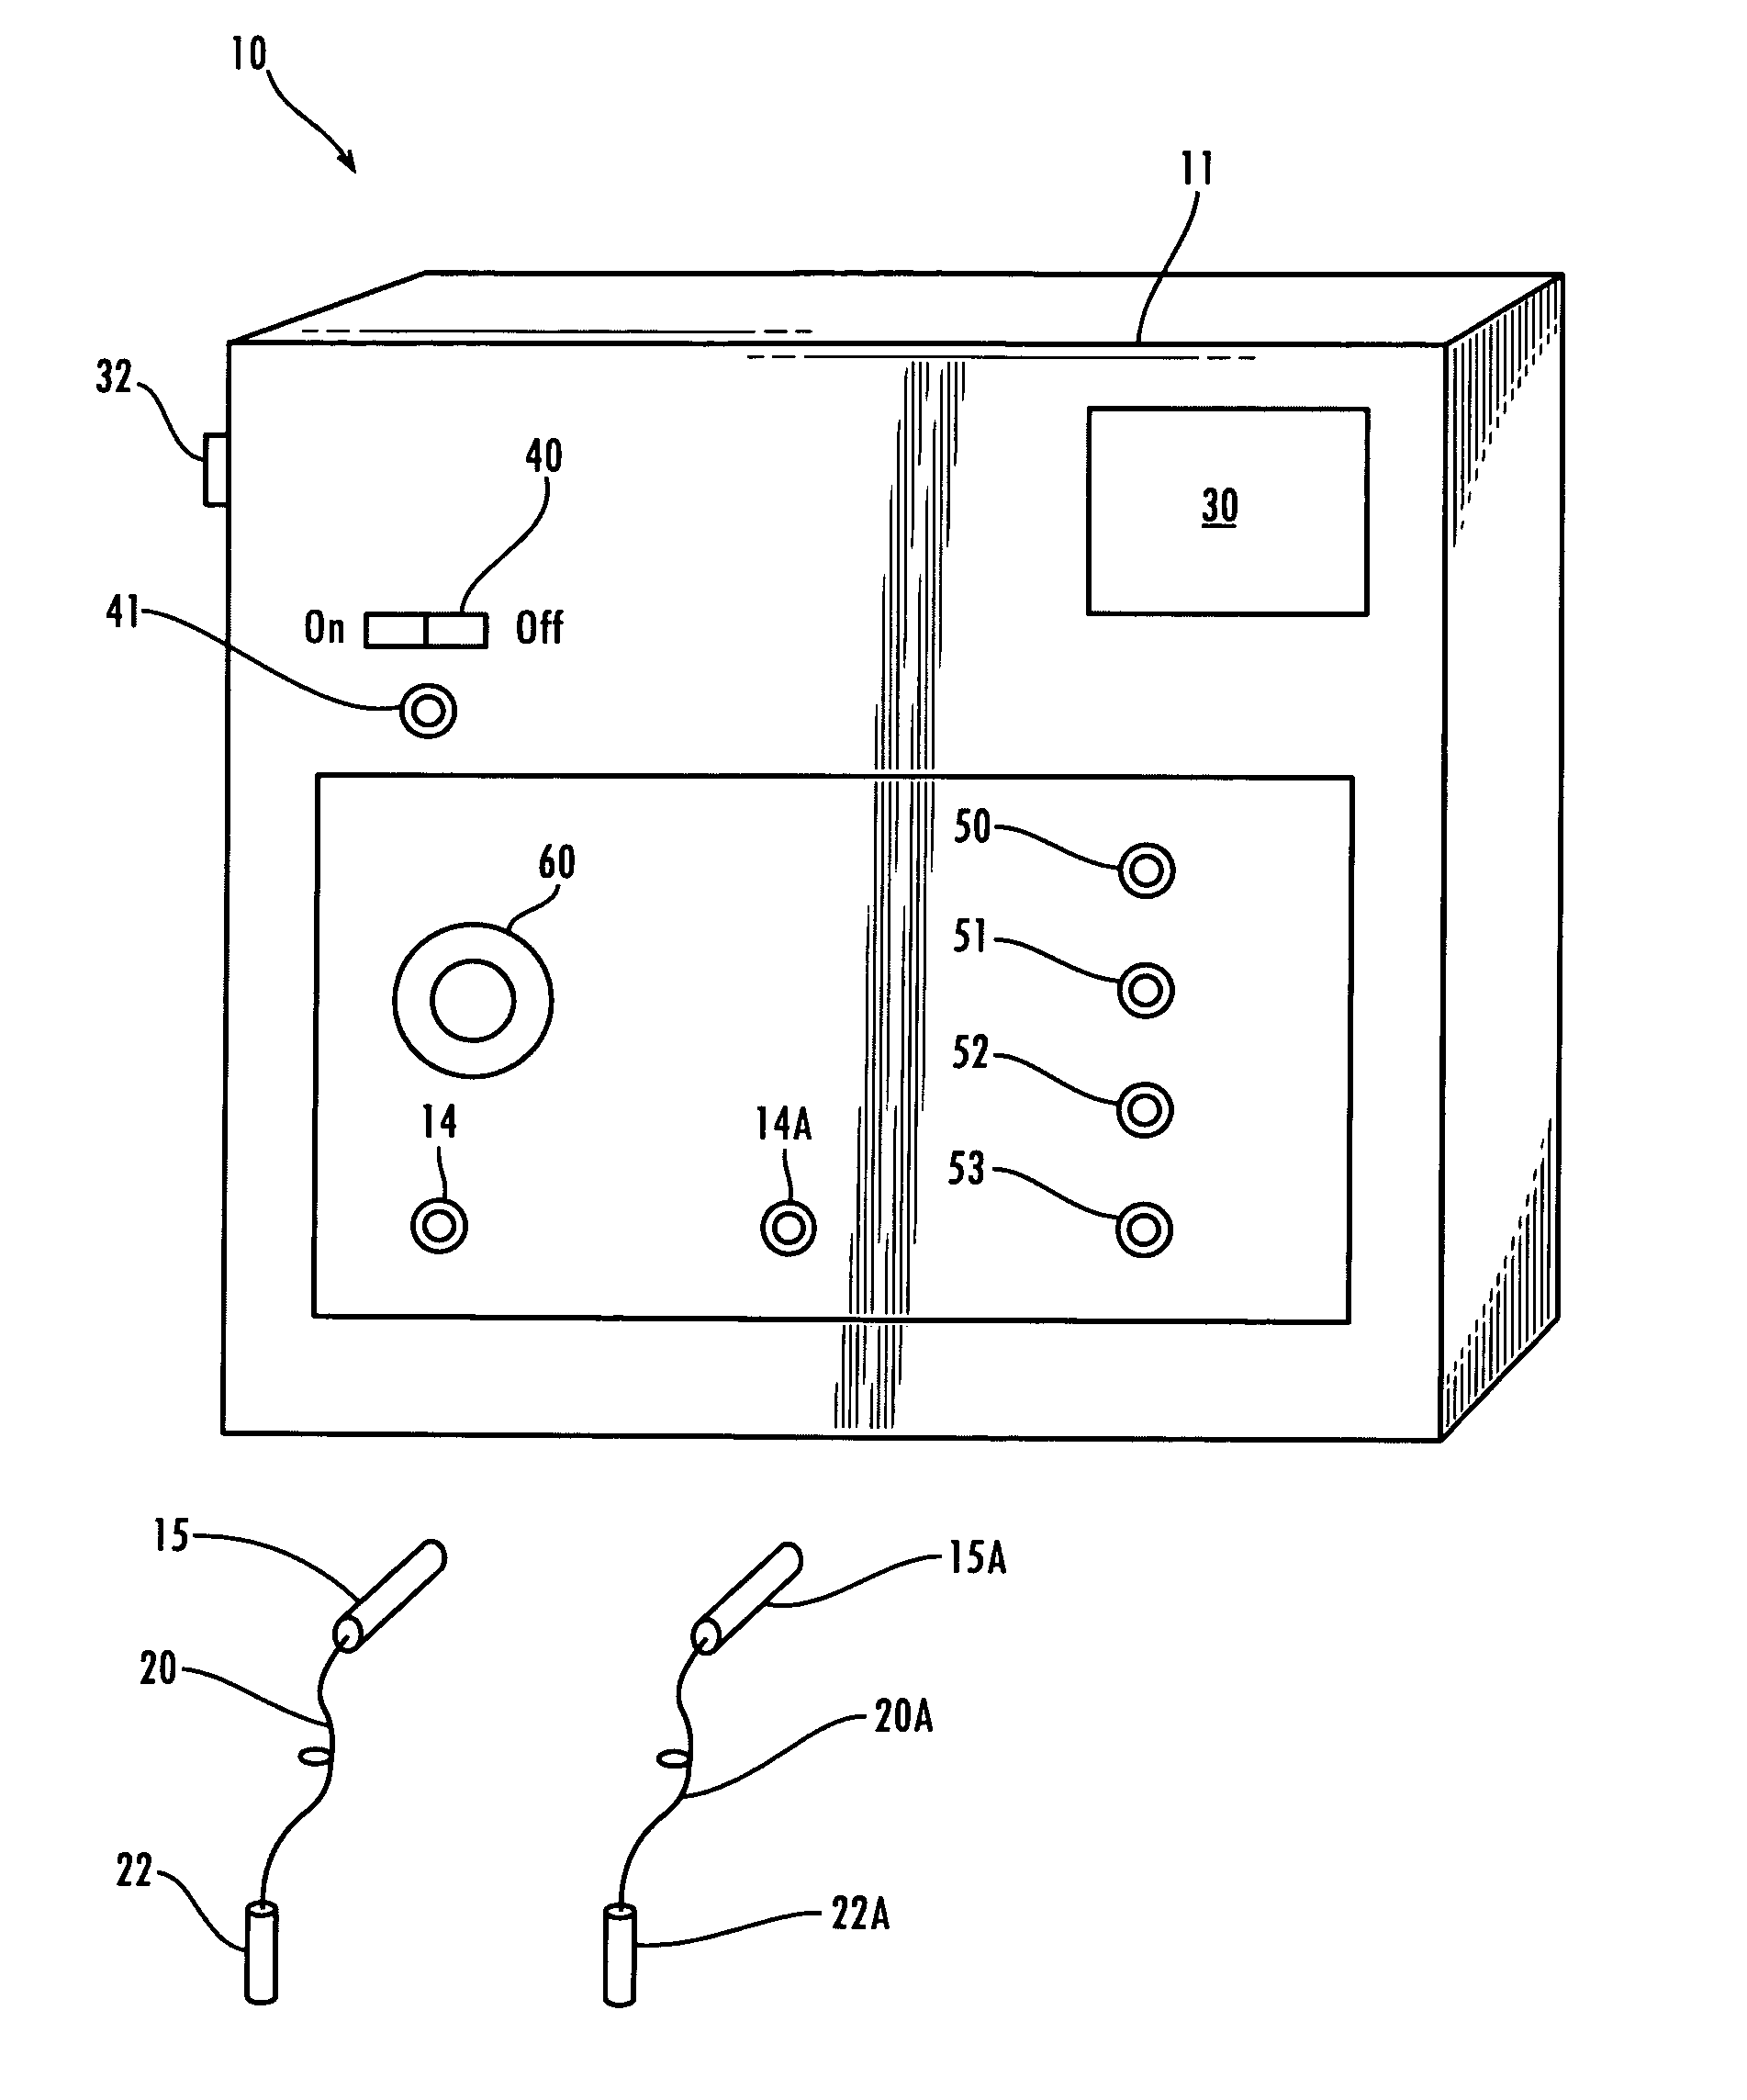 Method and apparatus for performing microcurrent stimulation (MSC) therapy